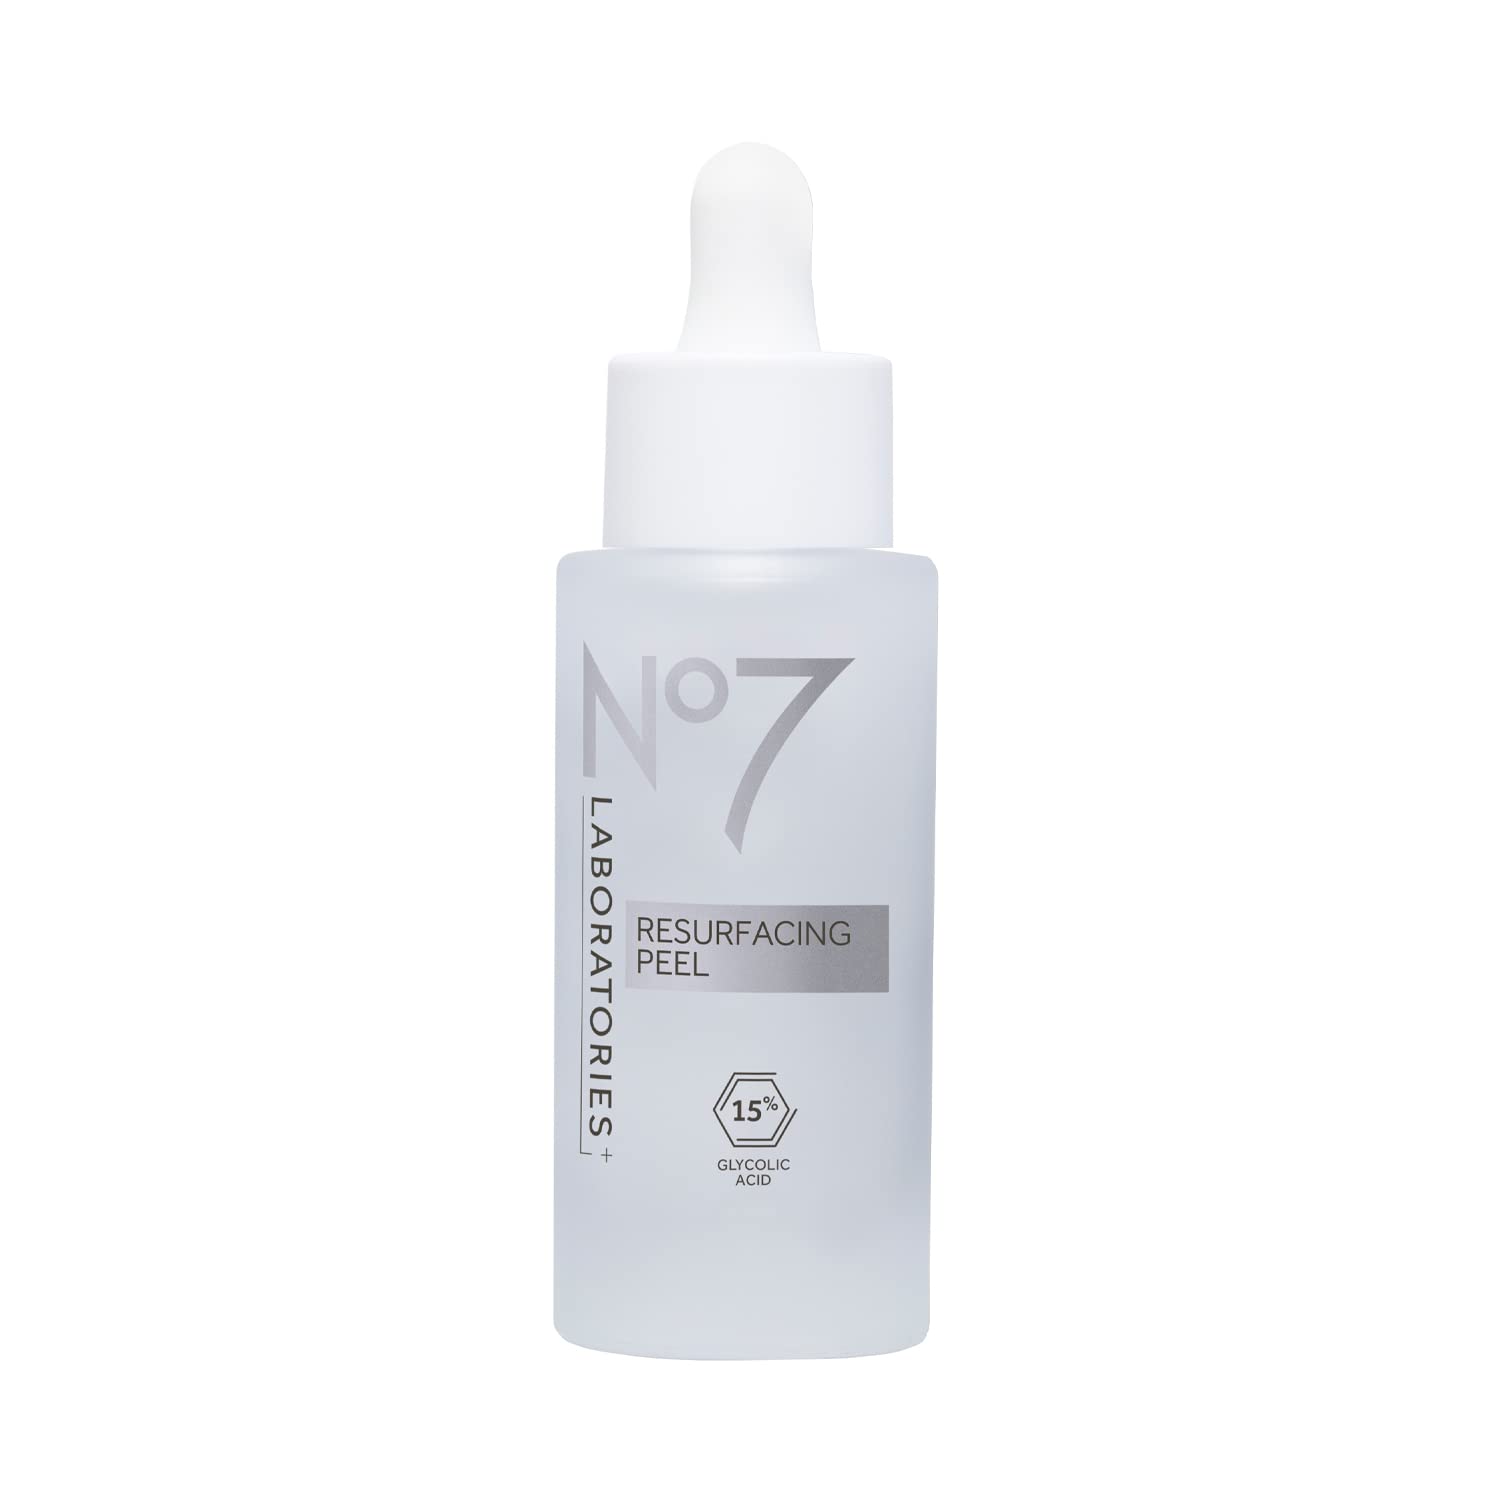 boots No7 Laboratories Resurfacing Peel 15% Glycolic Acid - Skin Resurfacing Face Peel for Smoother Skin - Brightening Pore Cleanser +